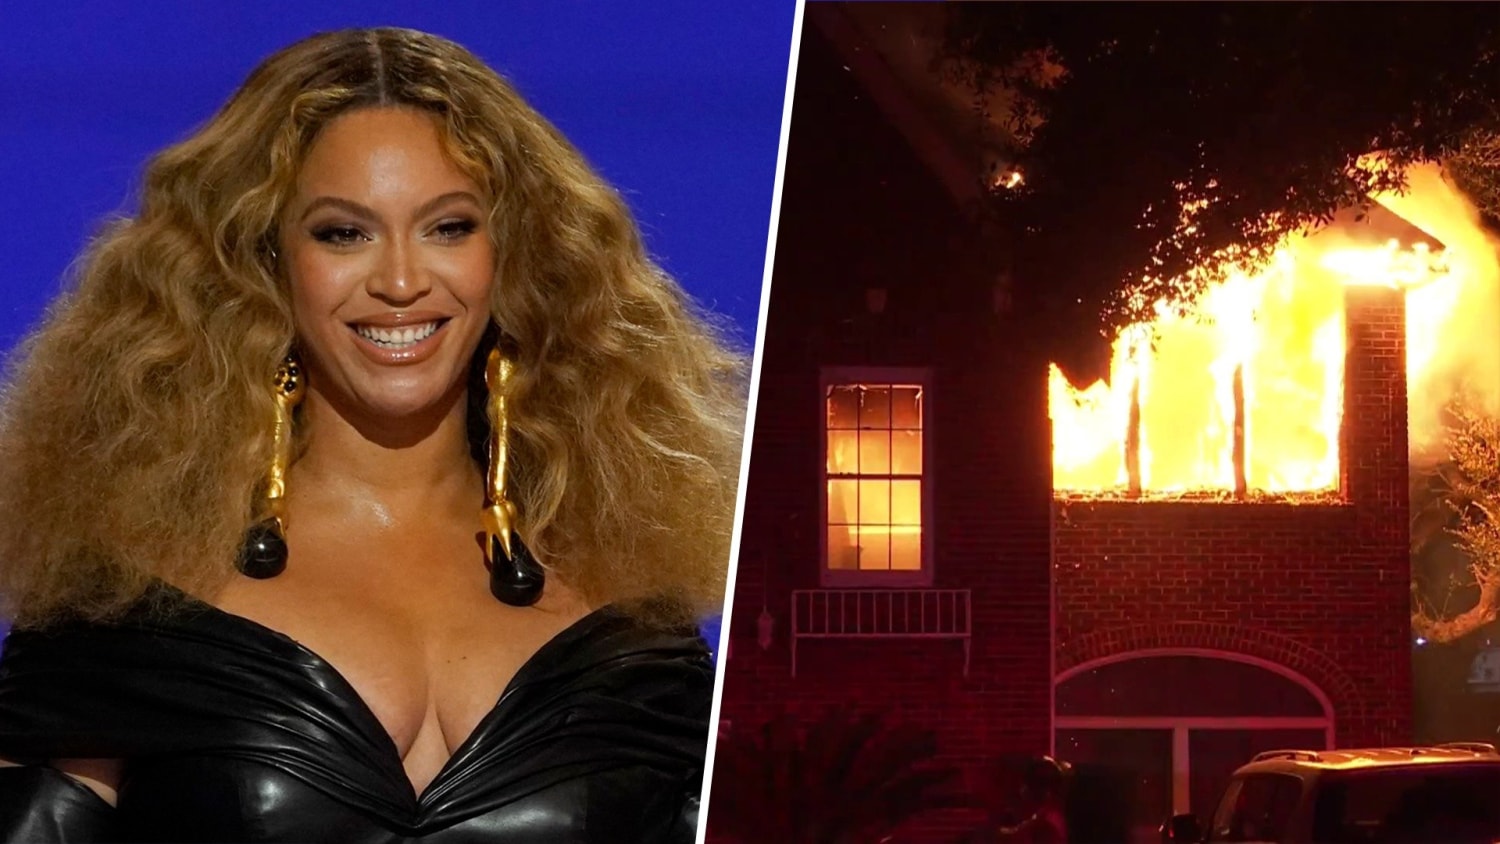 Beyoncé's childhood home in Houston catches fire on Christmas morning